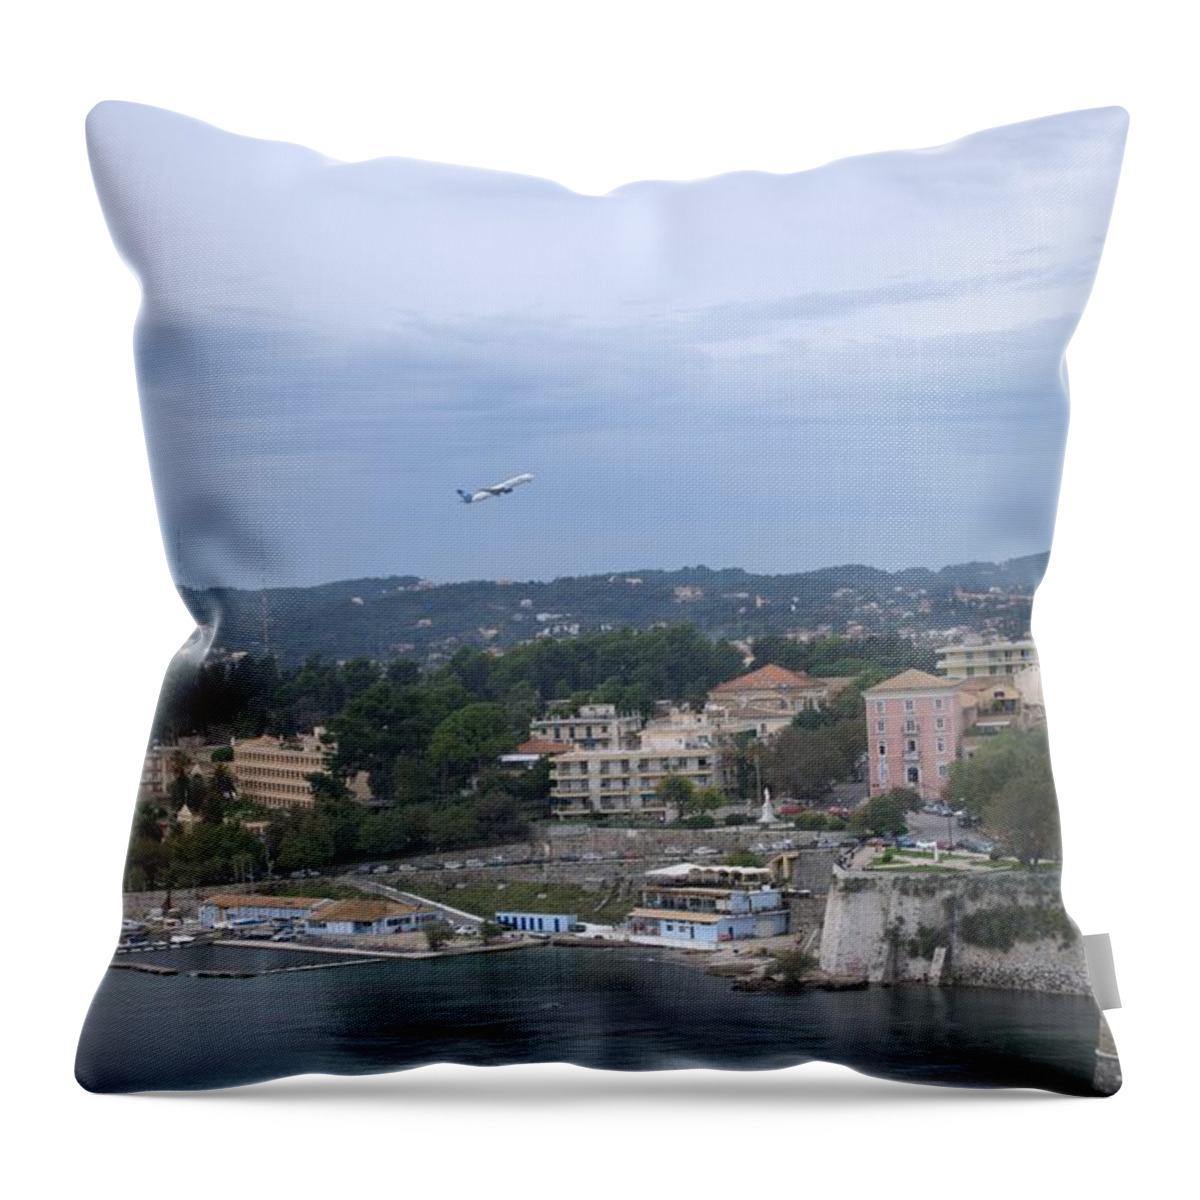 Corfu City 5 Throw Pillow featuring the photograph Corfu City 5 by George Katechis